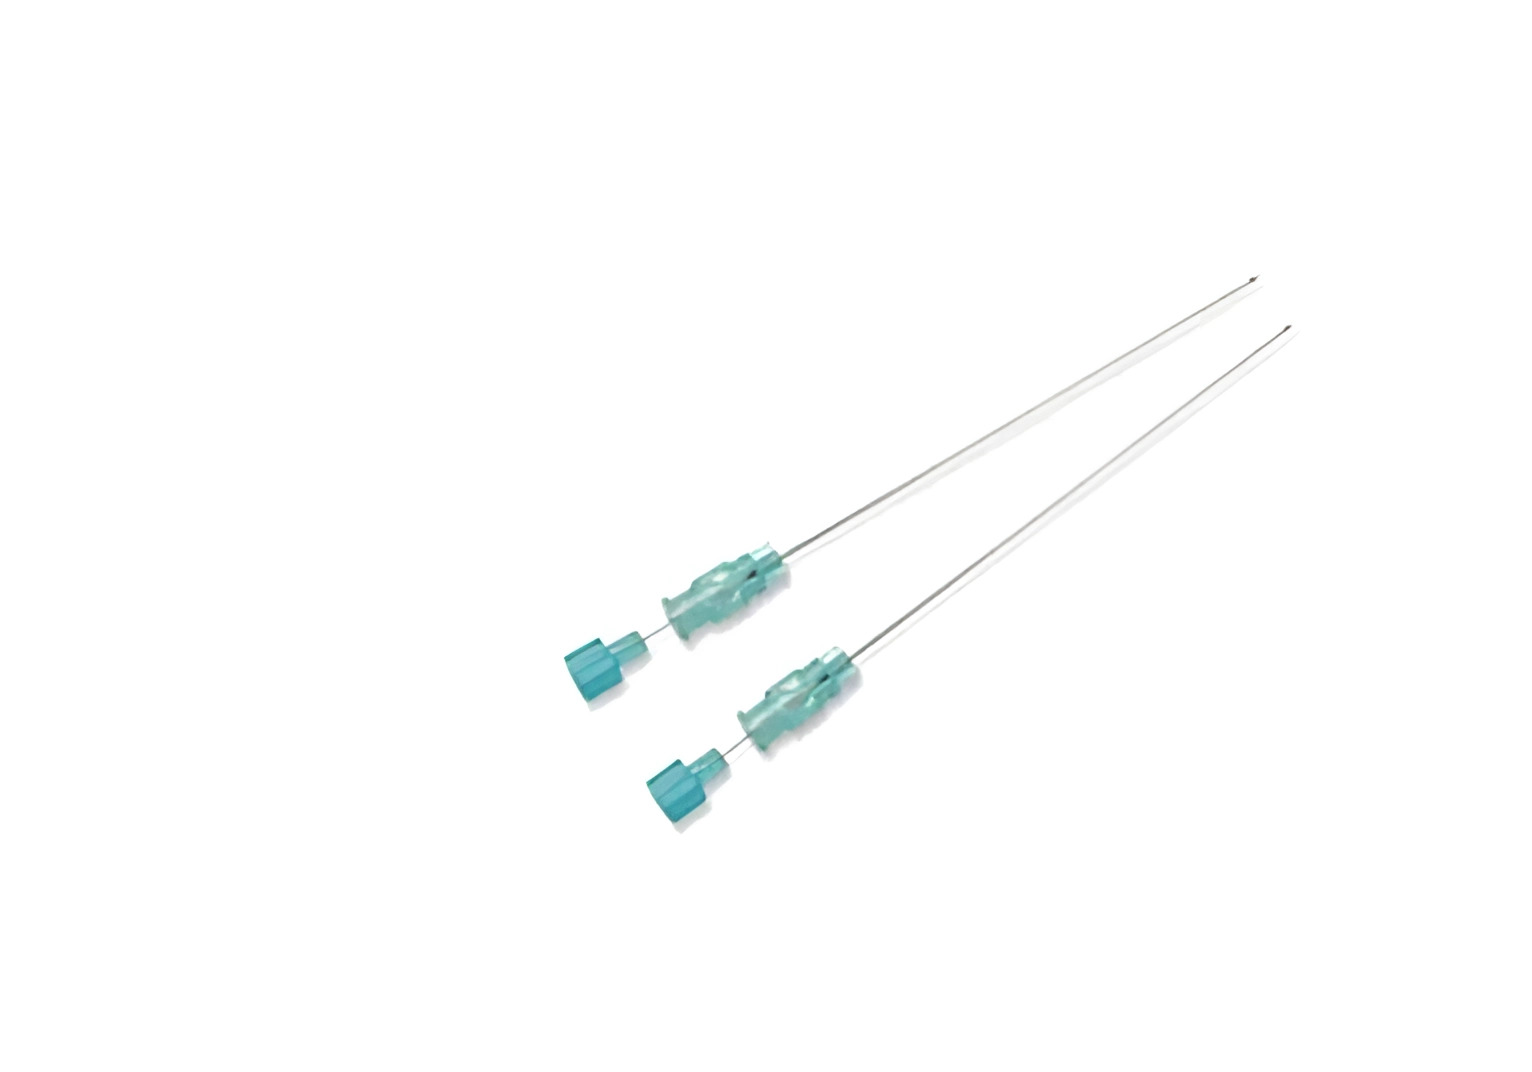 BD™ Whitacre - spinale anesthesienaalden - 25G x 3 1/2"- blauw - 25 st